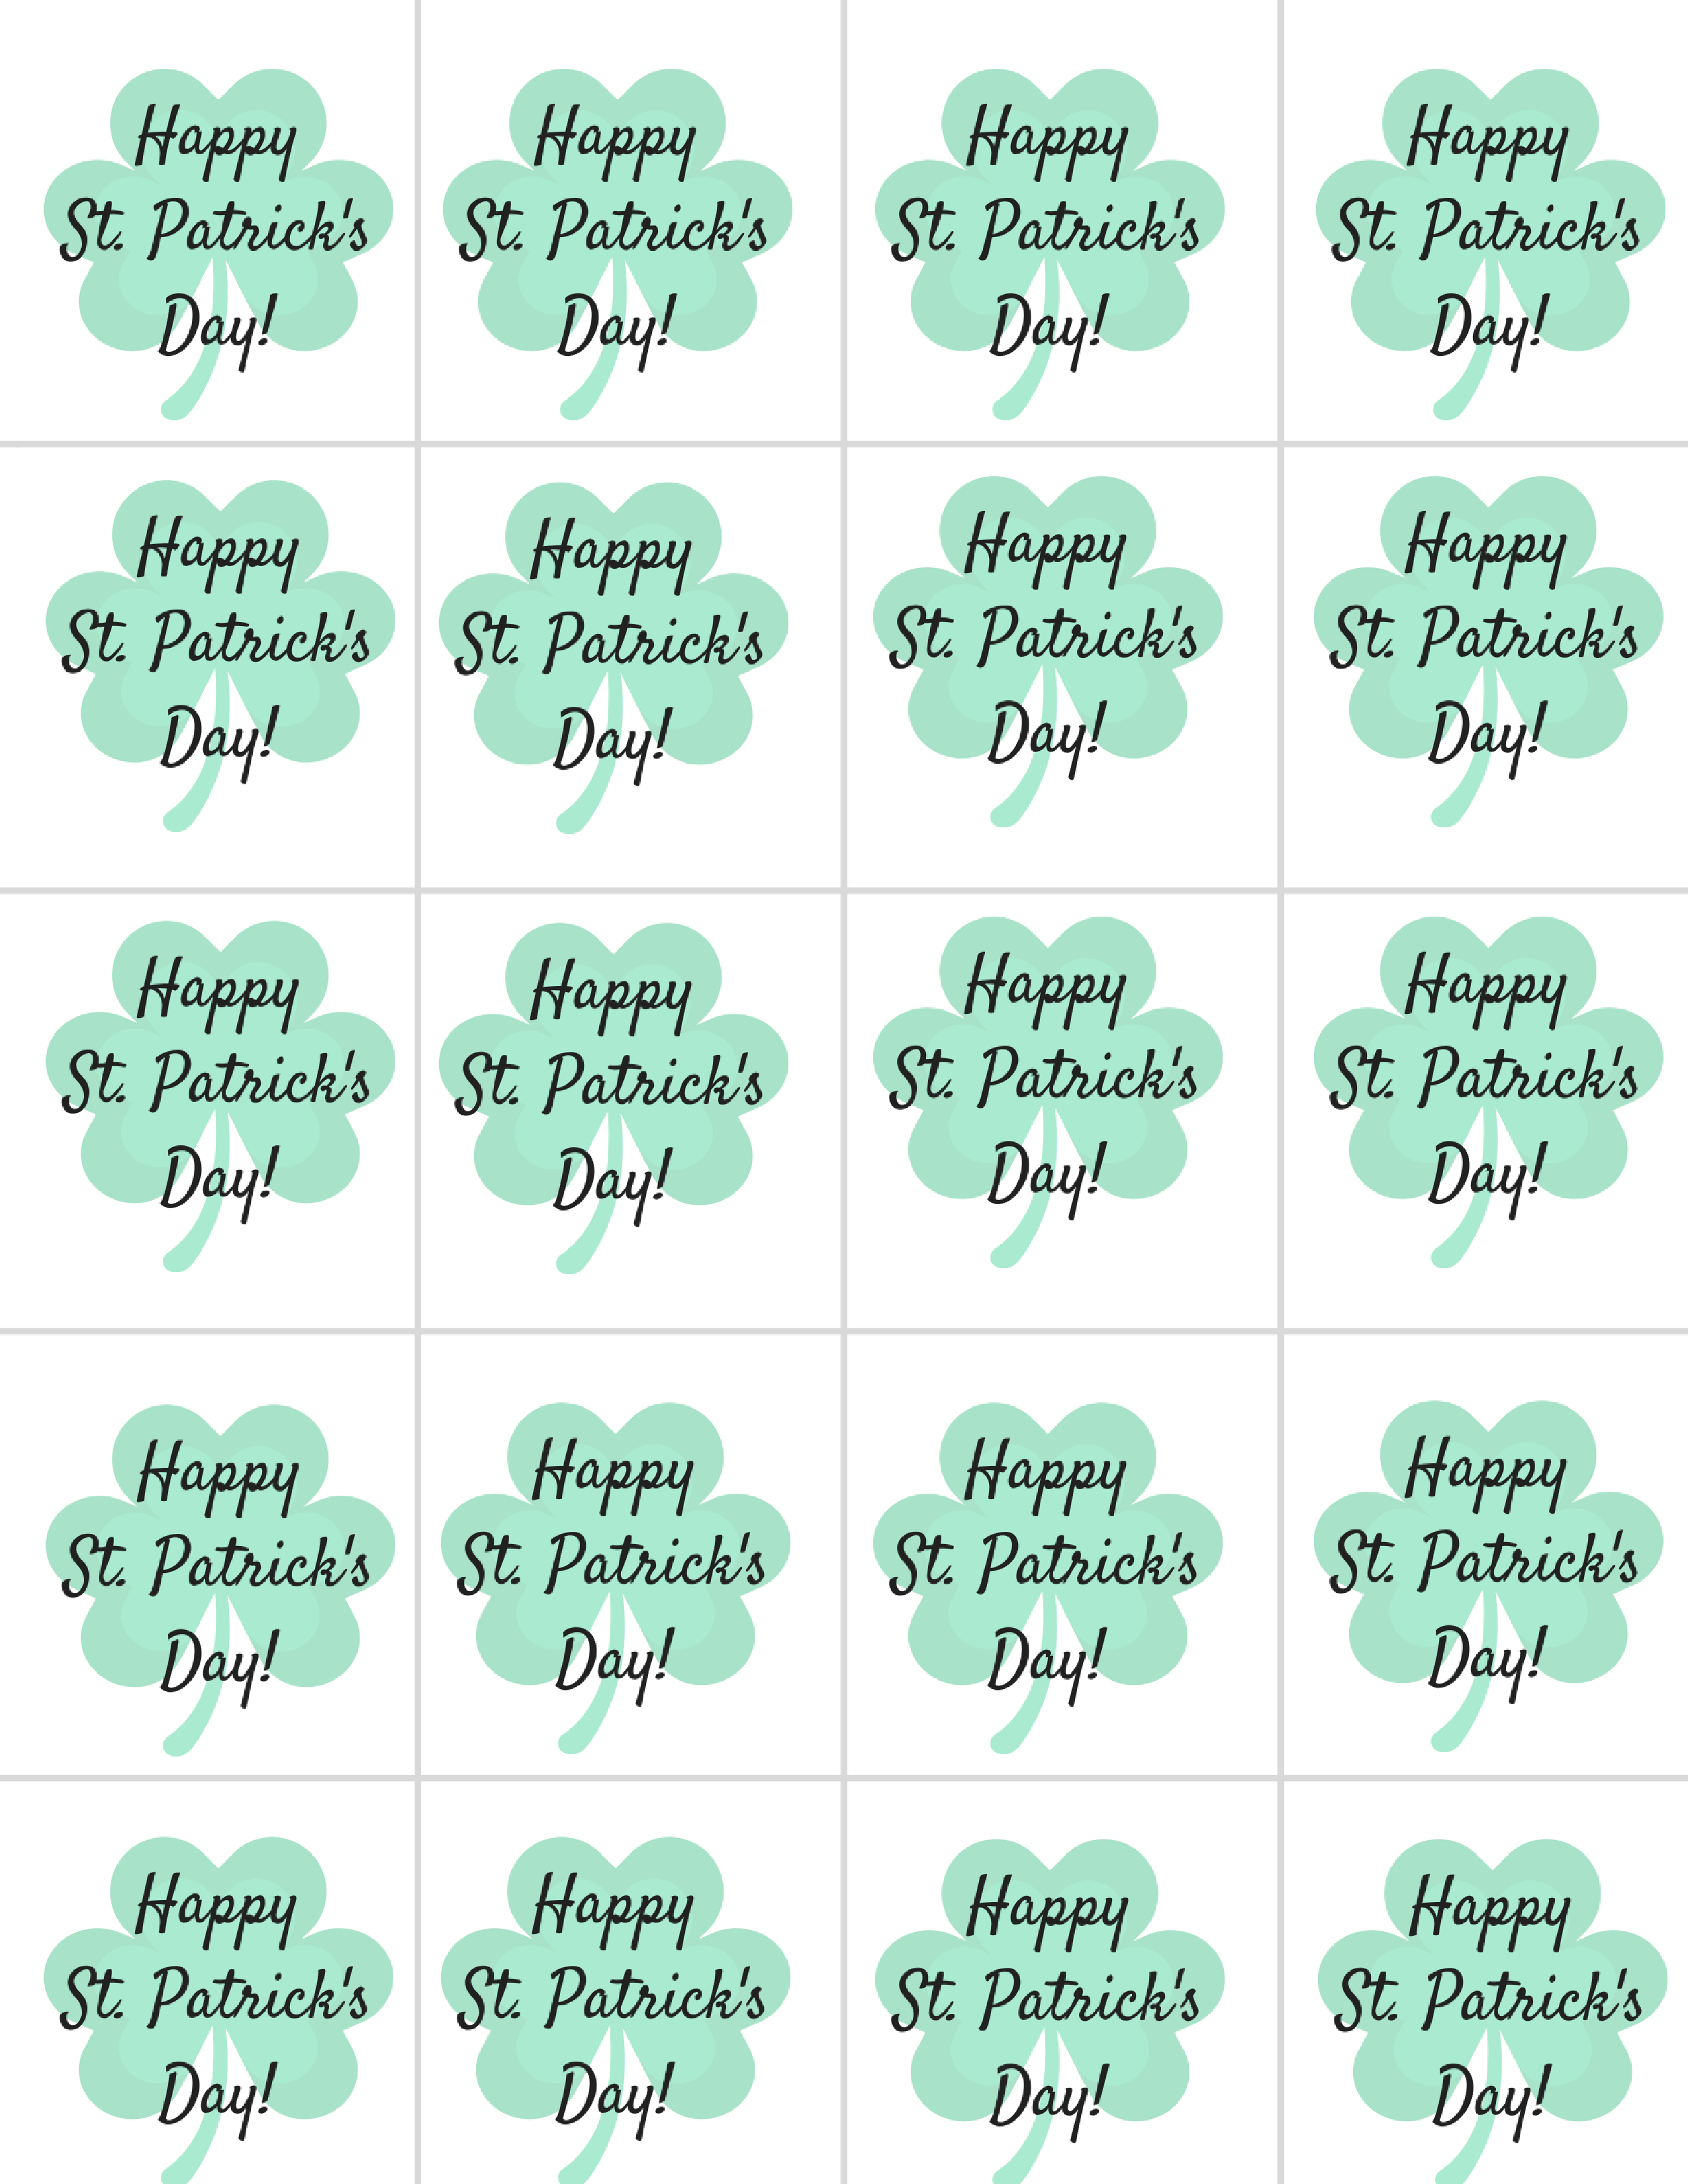 Example sheet of 20 printable tags on 1 page with shamrock in background that say "Happy St. Patrick's day"